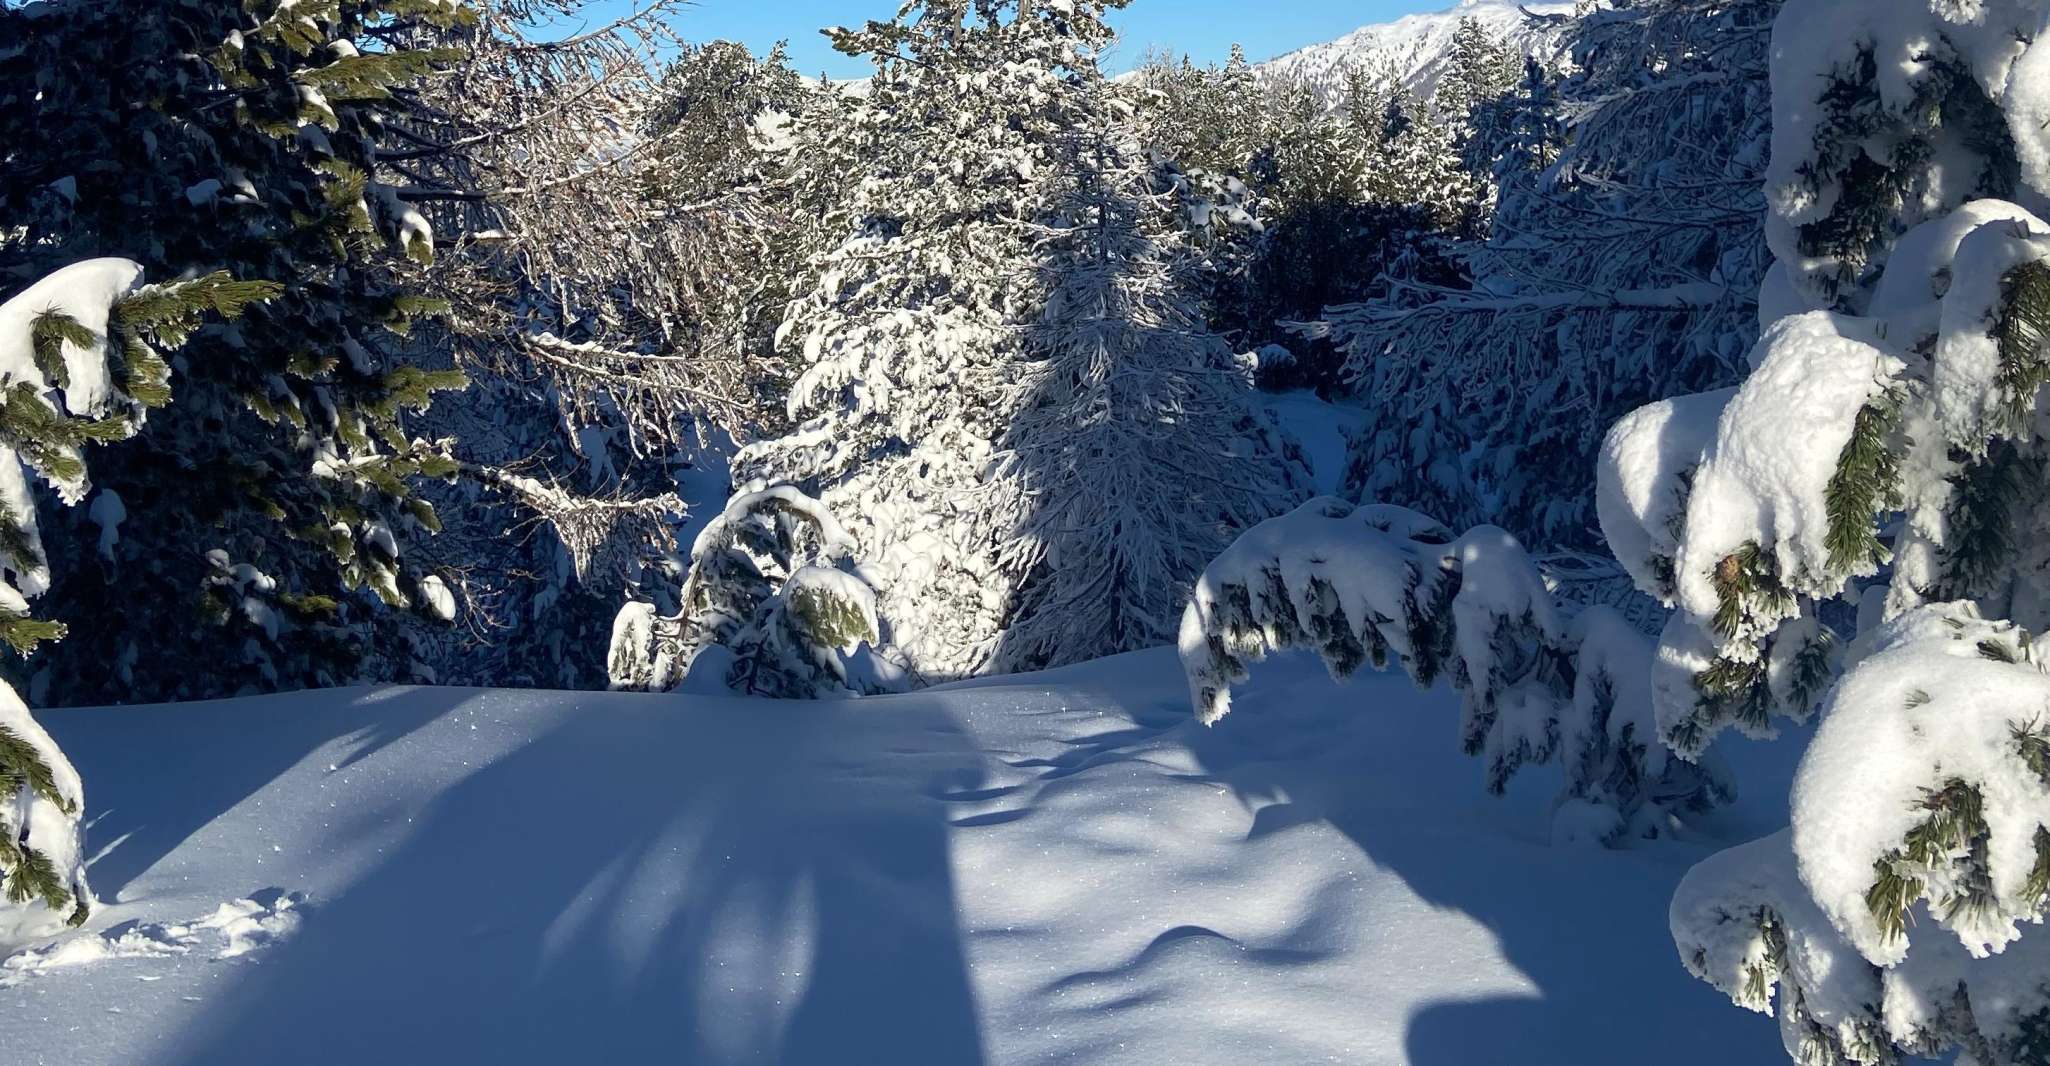 Vialattea, Snowshoeing into the snowy forest - Housity